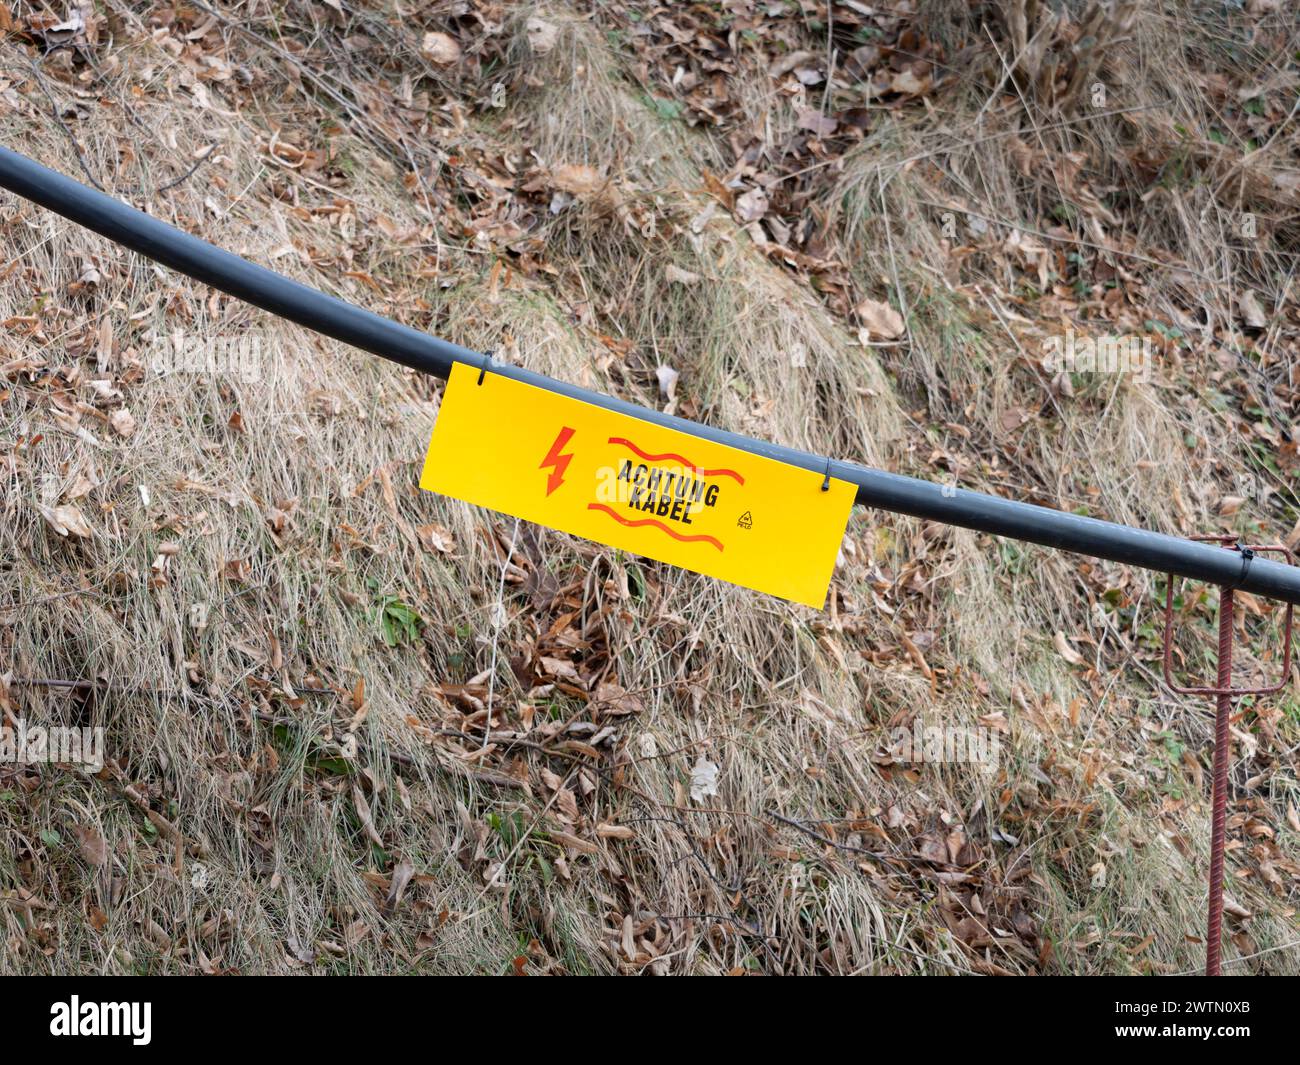 Achtung Kabel (Caution Electric Cable) sign on a thick black supply cord. Safety at a construction site in front of a property. Stock Photo